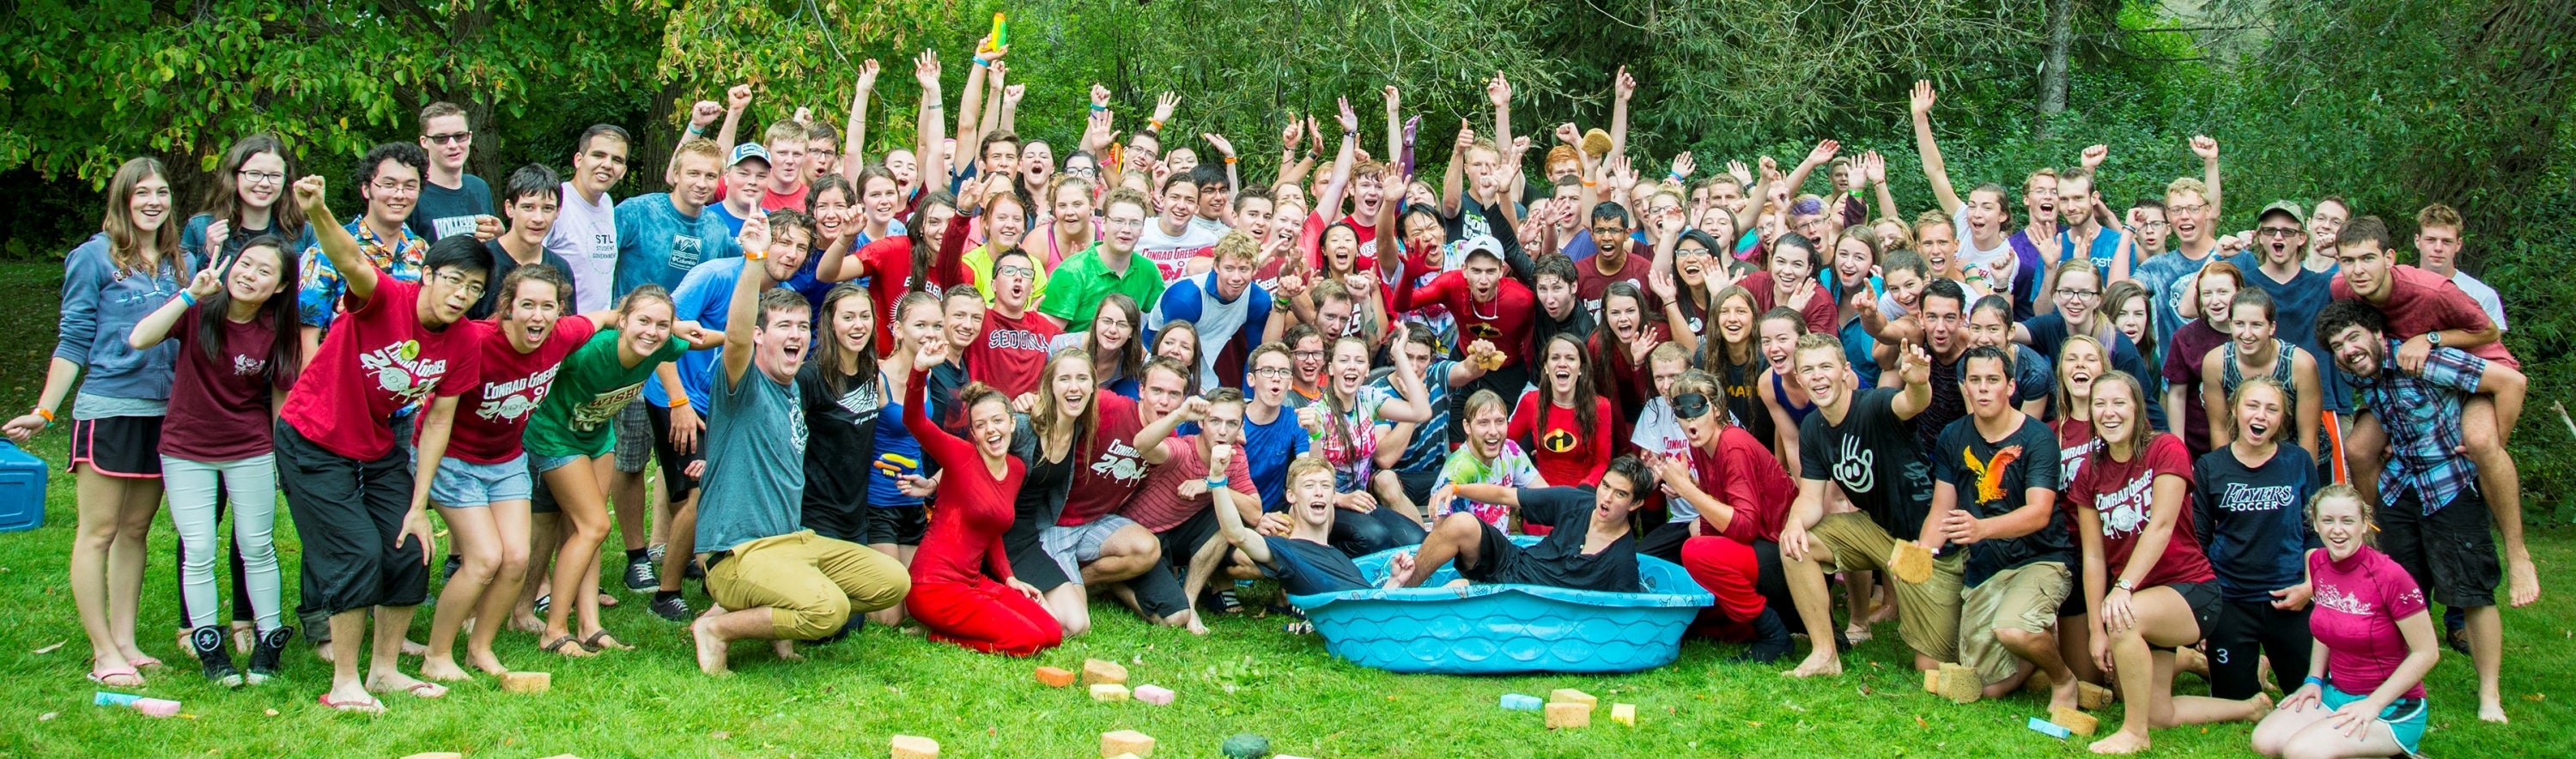 group photo of Grebel students during orientation week 